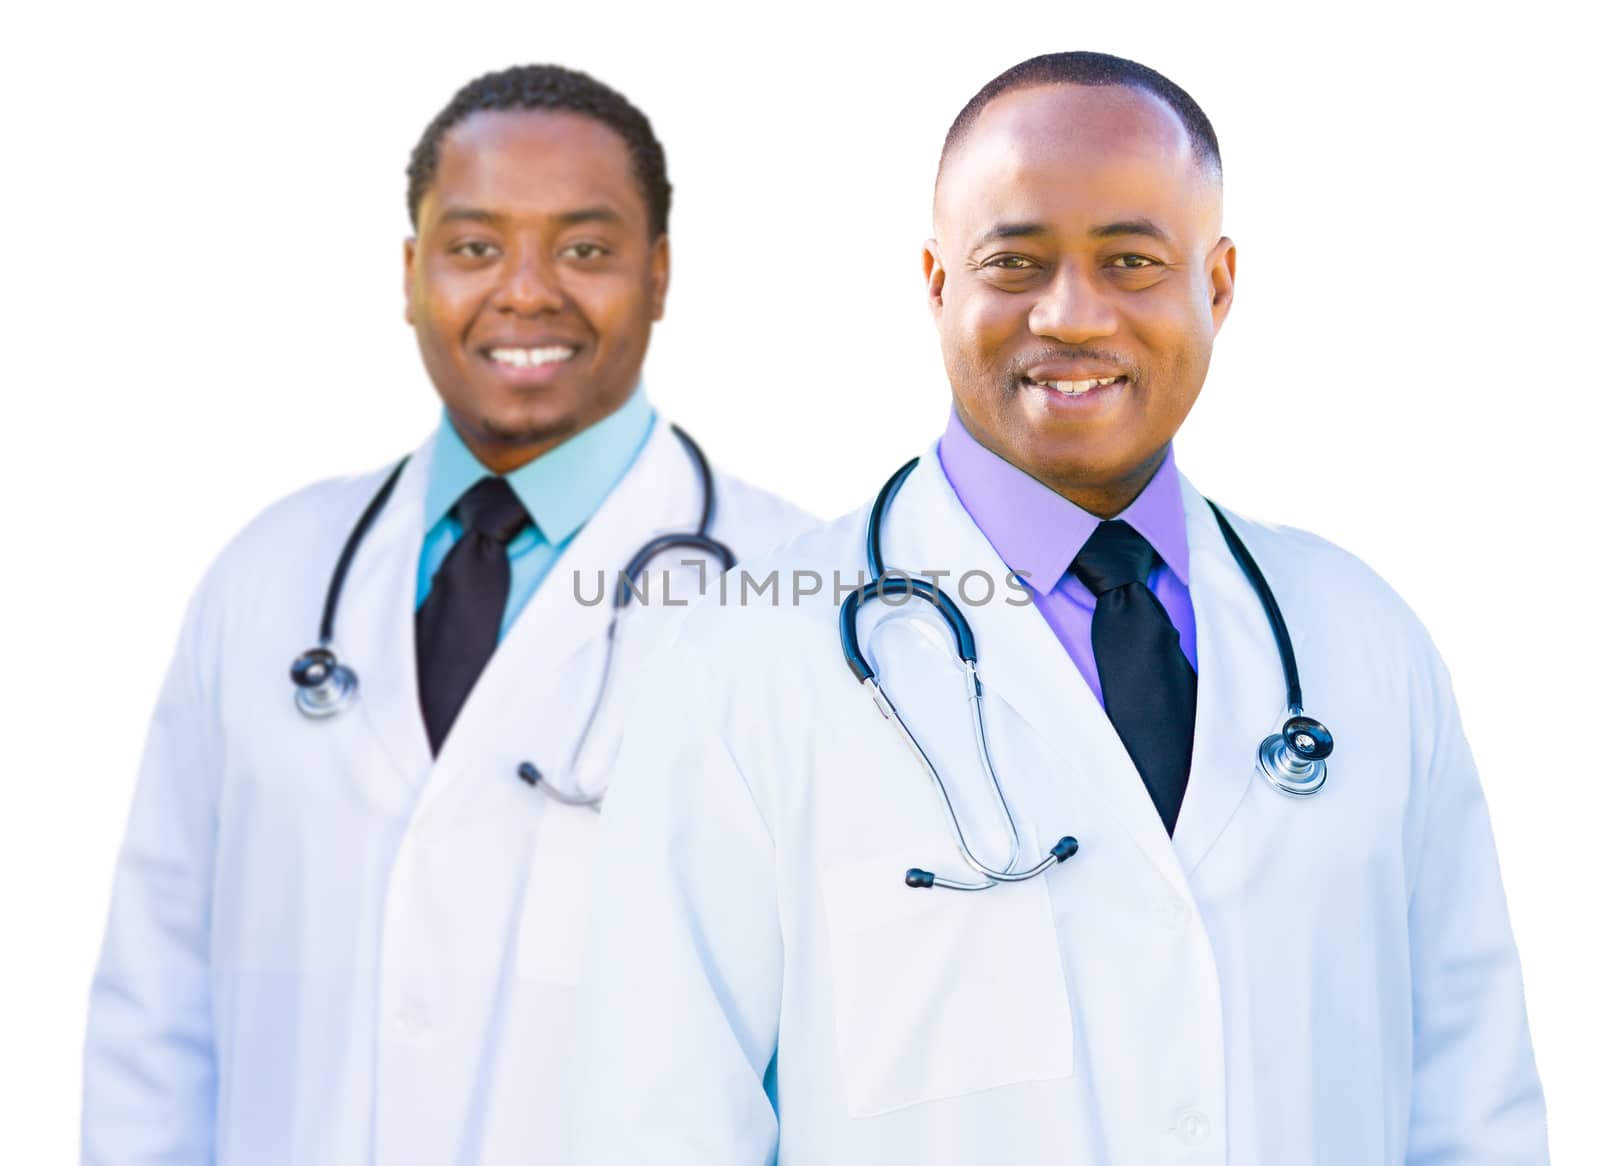 Two frican American Male Doctors Isolated on a White Background by Feverpitched